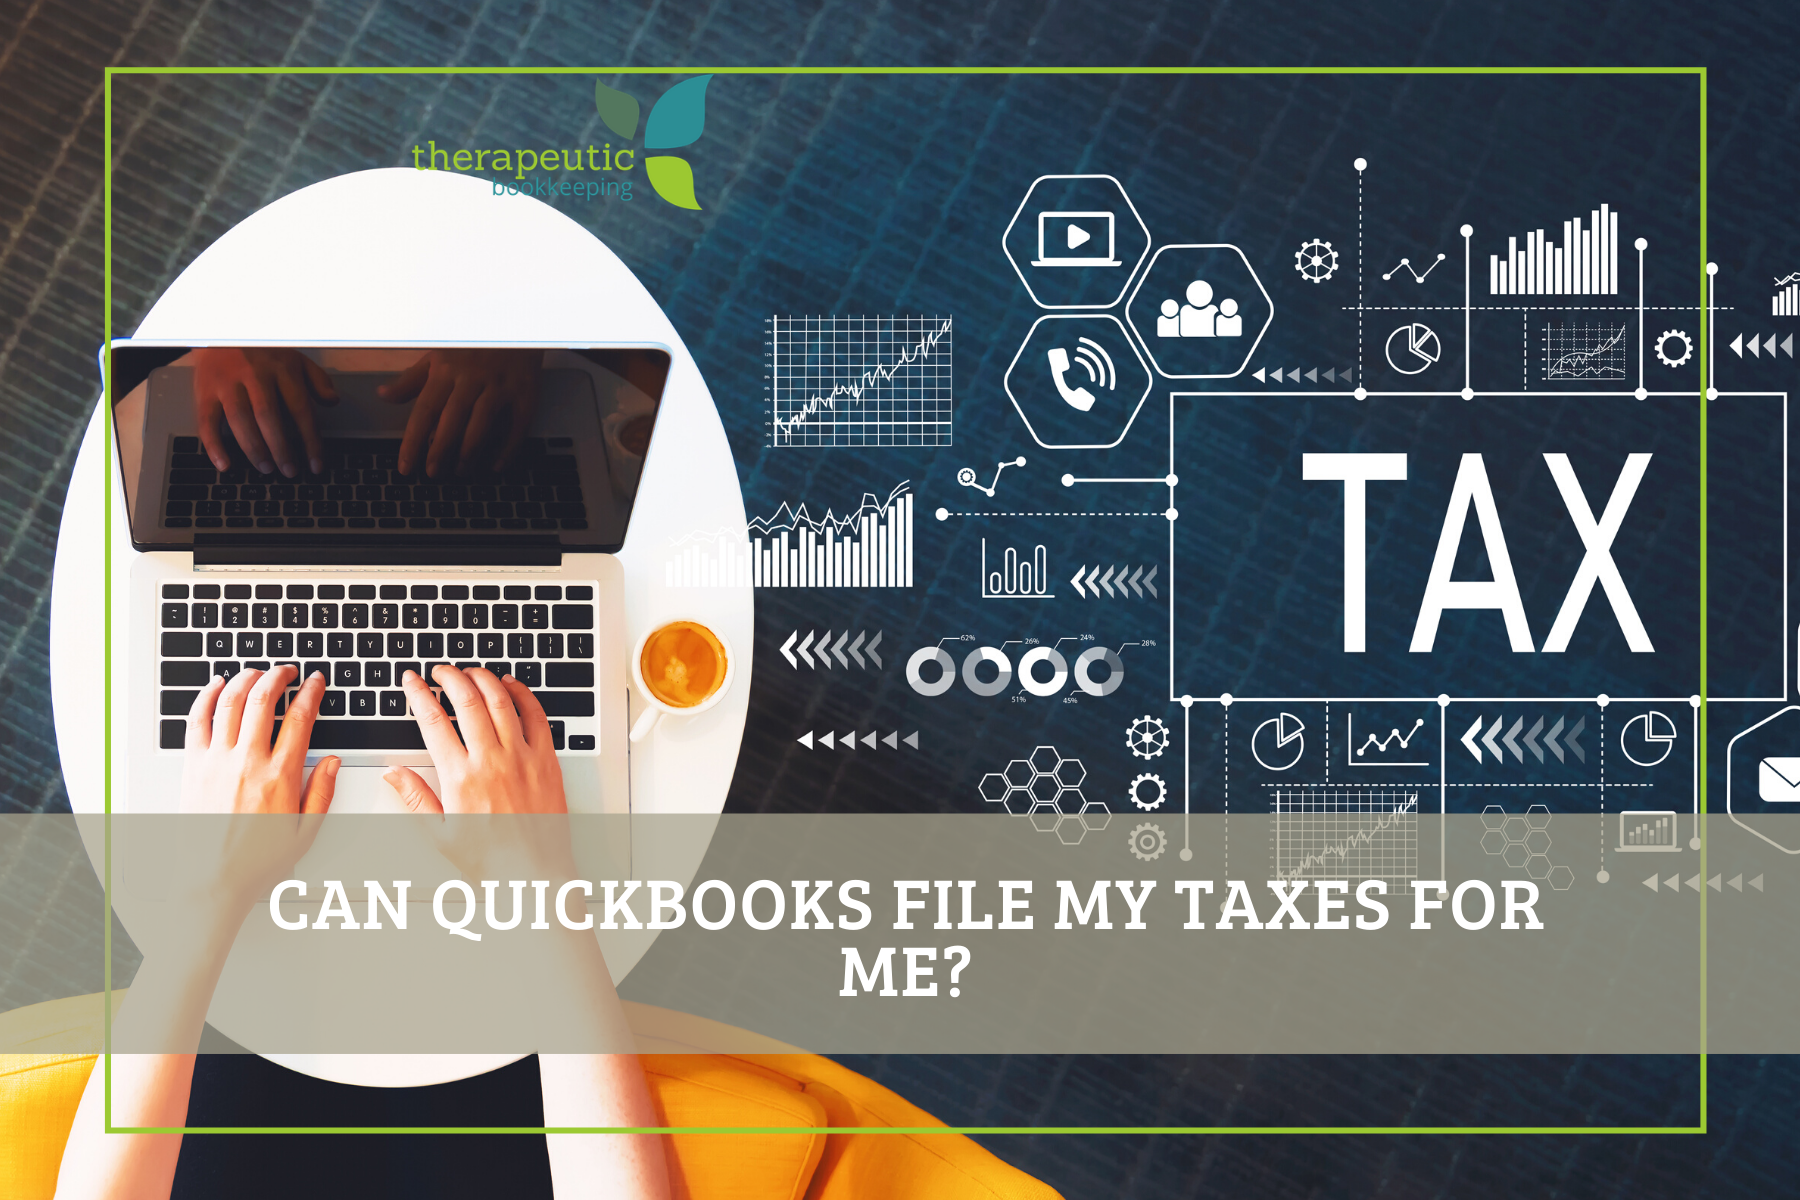 Can quickbooks file my taxes for me